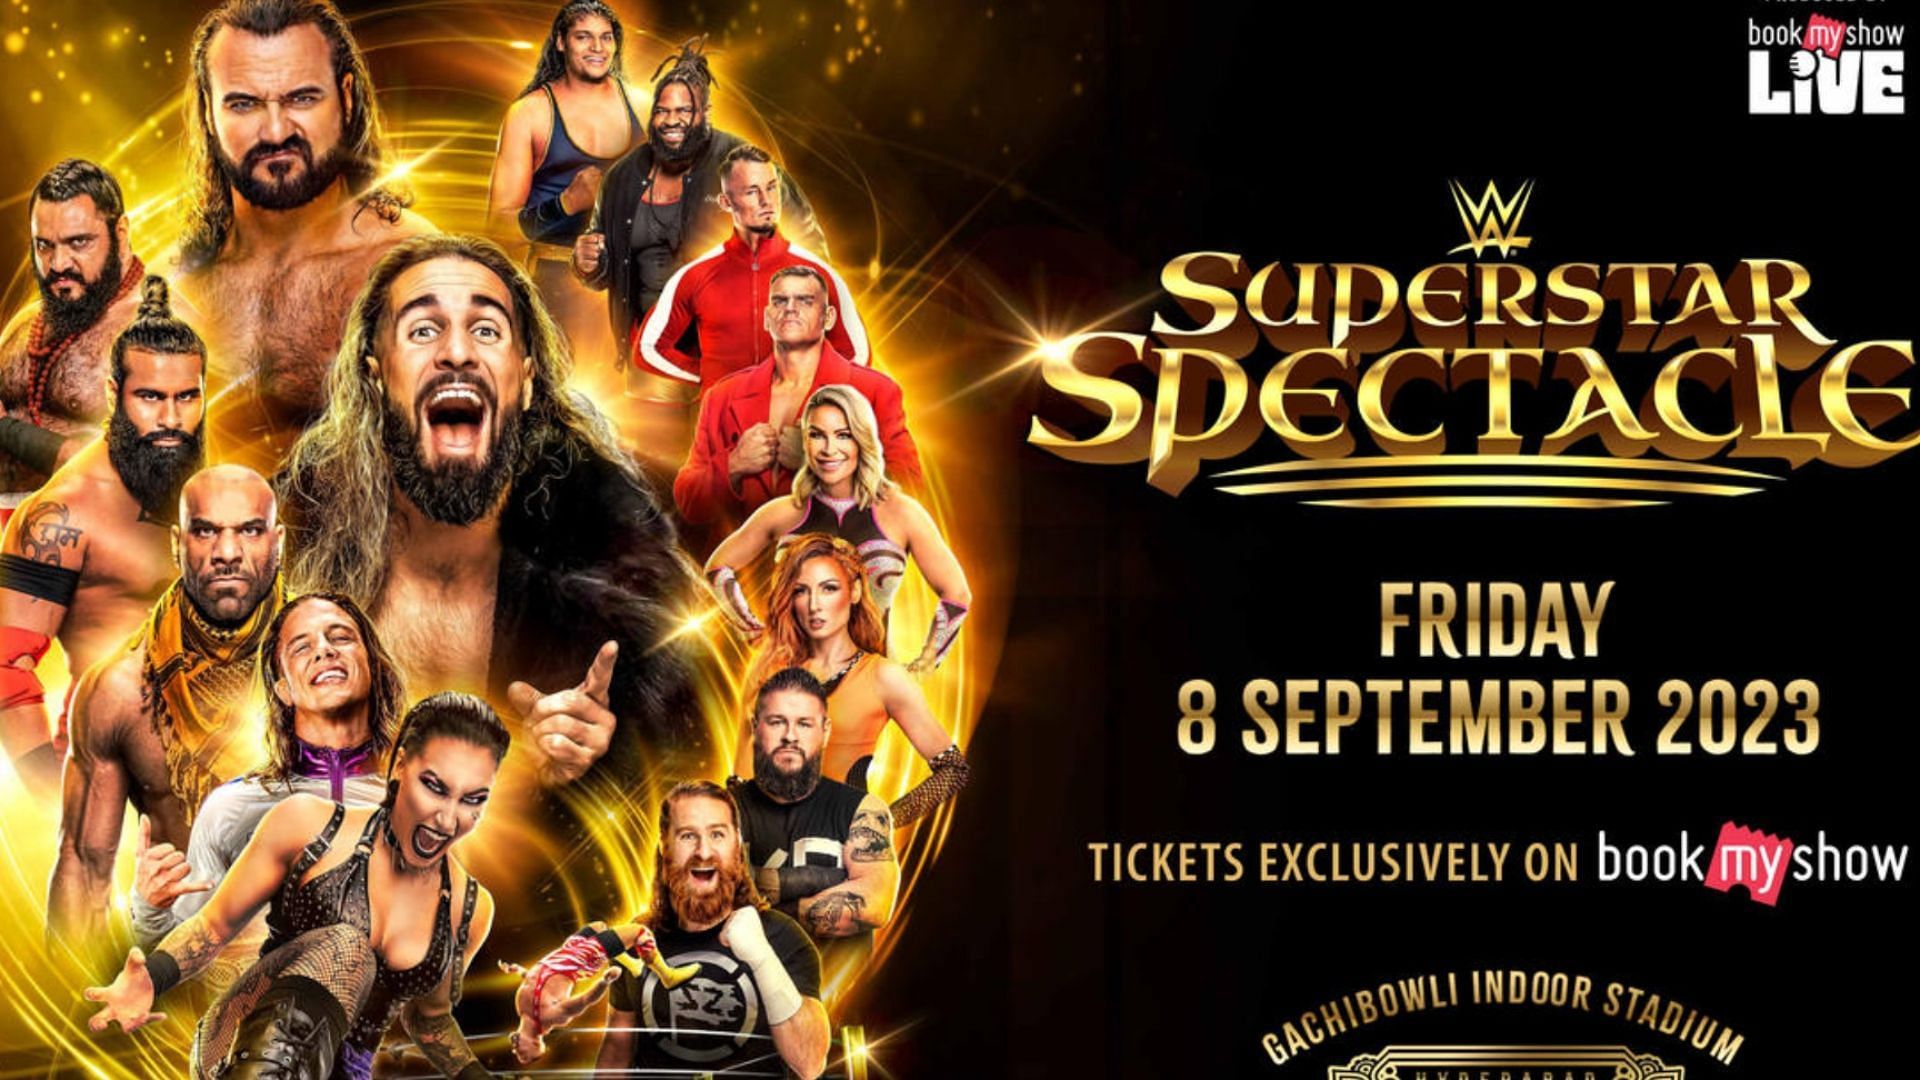 WWE is returning to India on Friday September 8th.